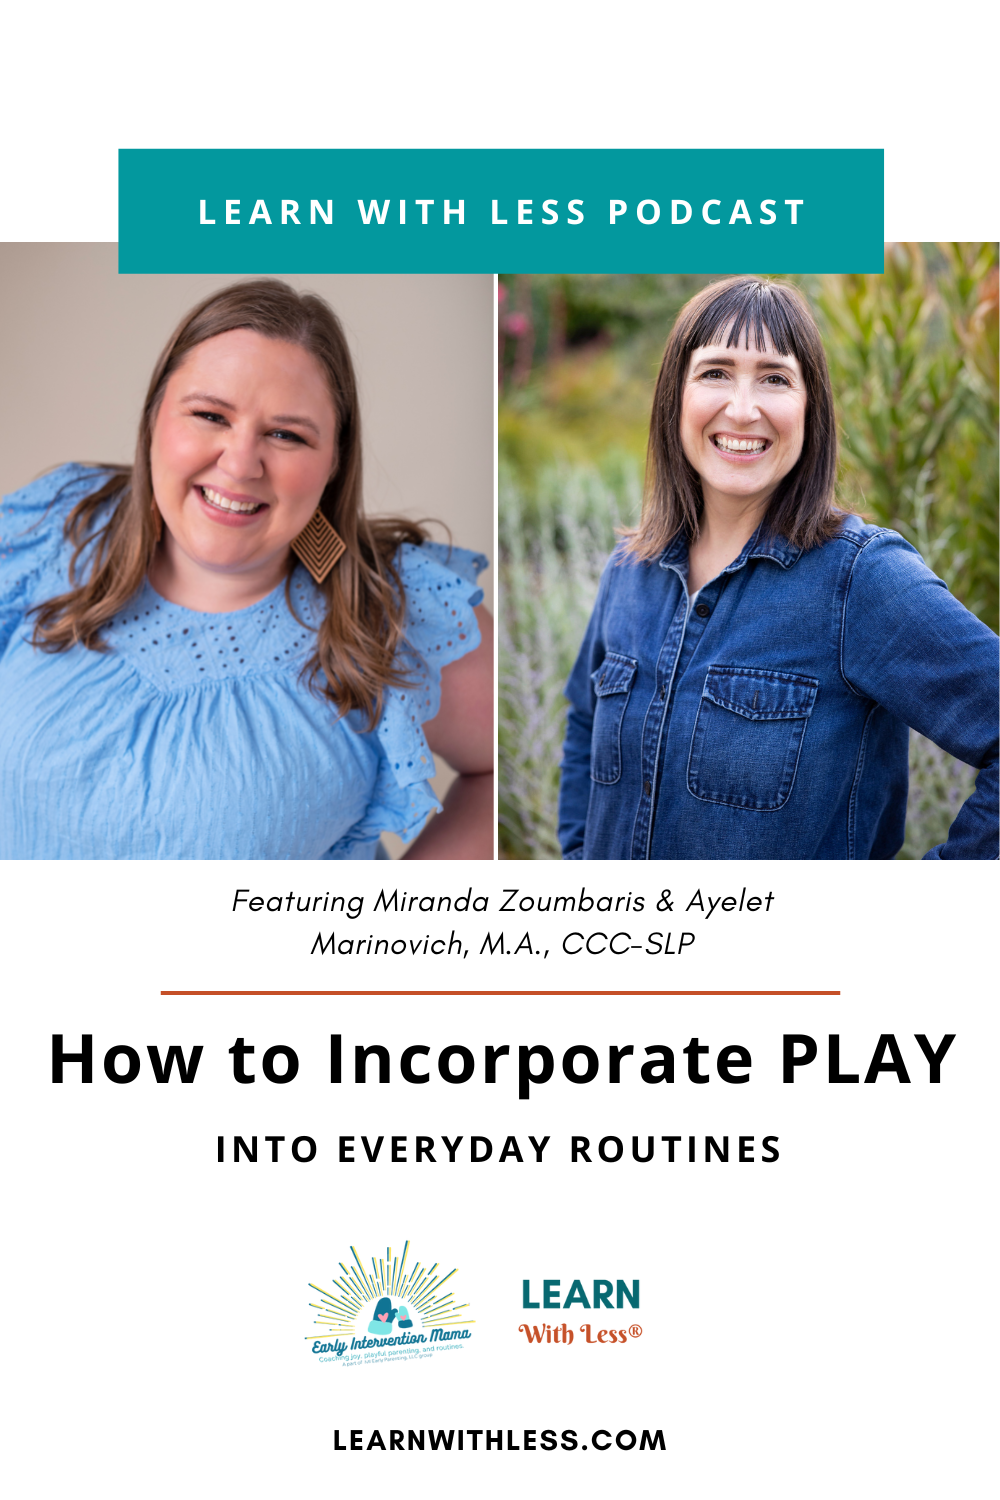 How to Incorporate PLAY into Everyday Routines, with Miranda Zoumbaris and Ayelet Marinovich